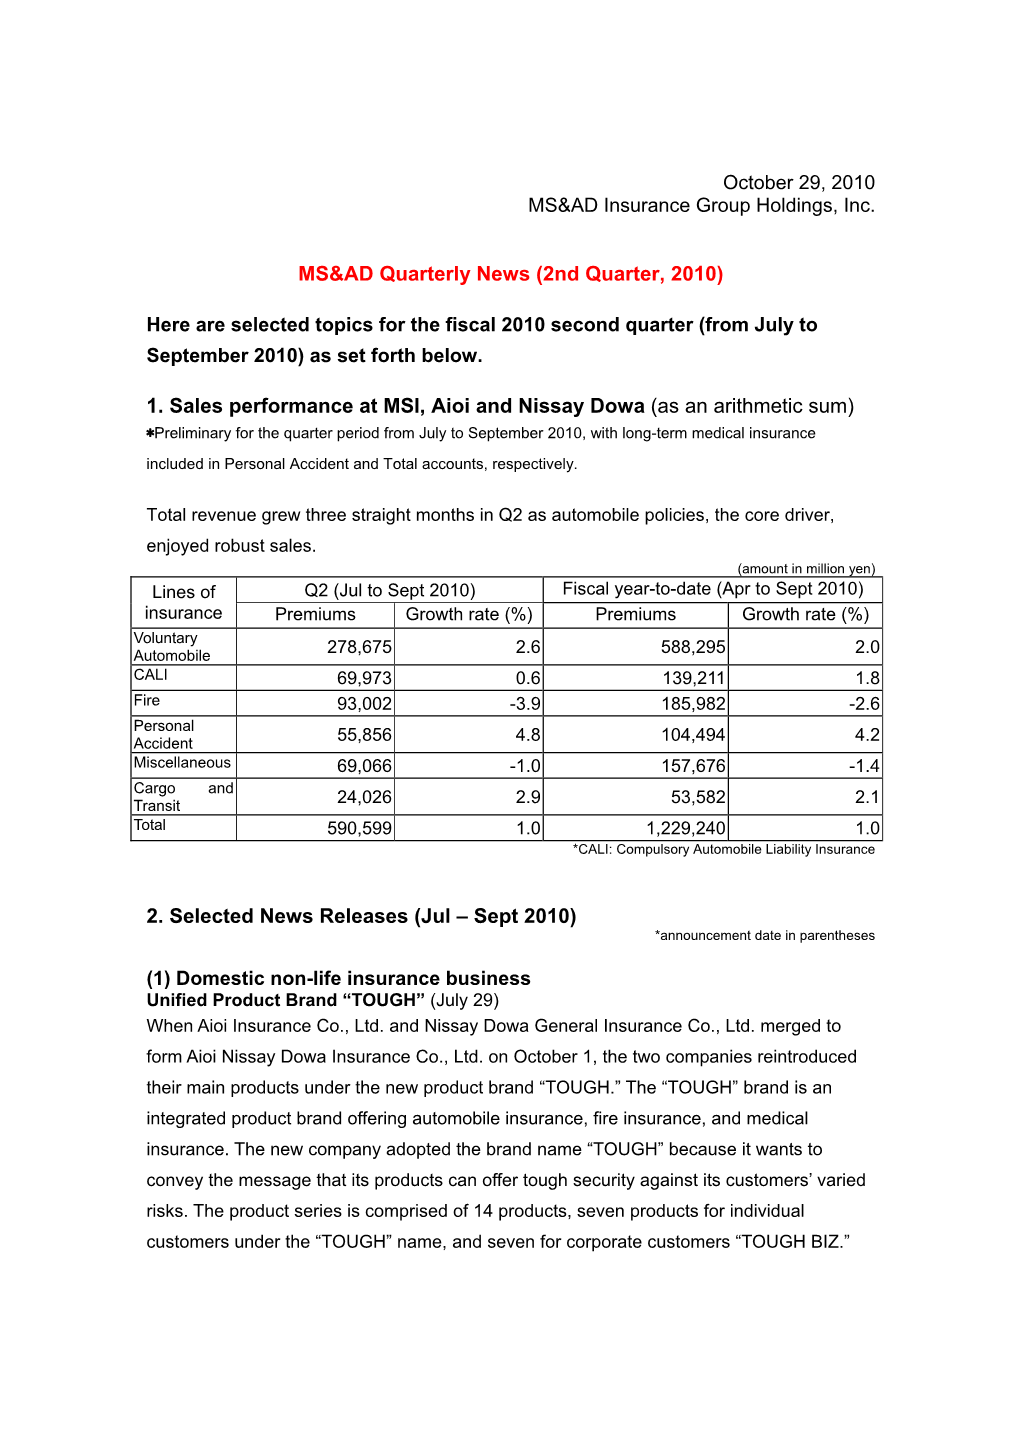 MS&AD Quarterly News (2Nd Quarter, 2010) 1. Sales Performance at MSI